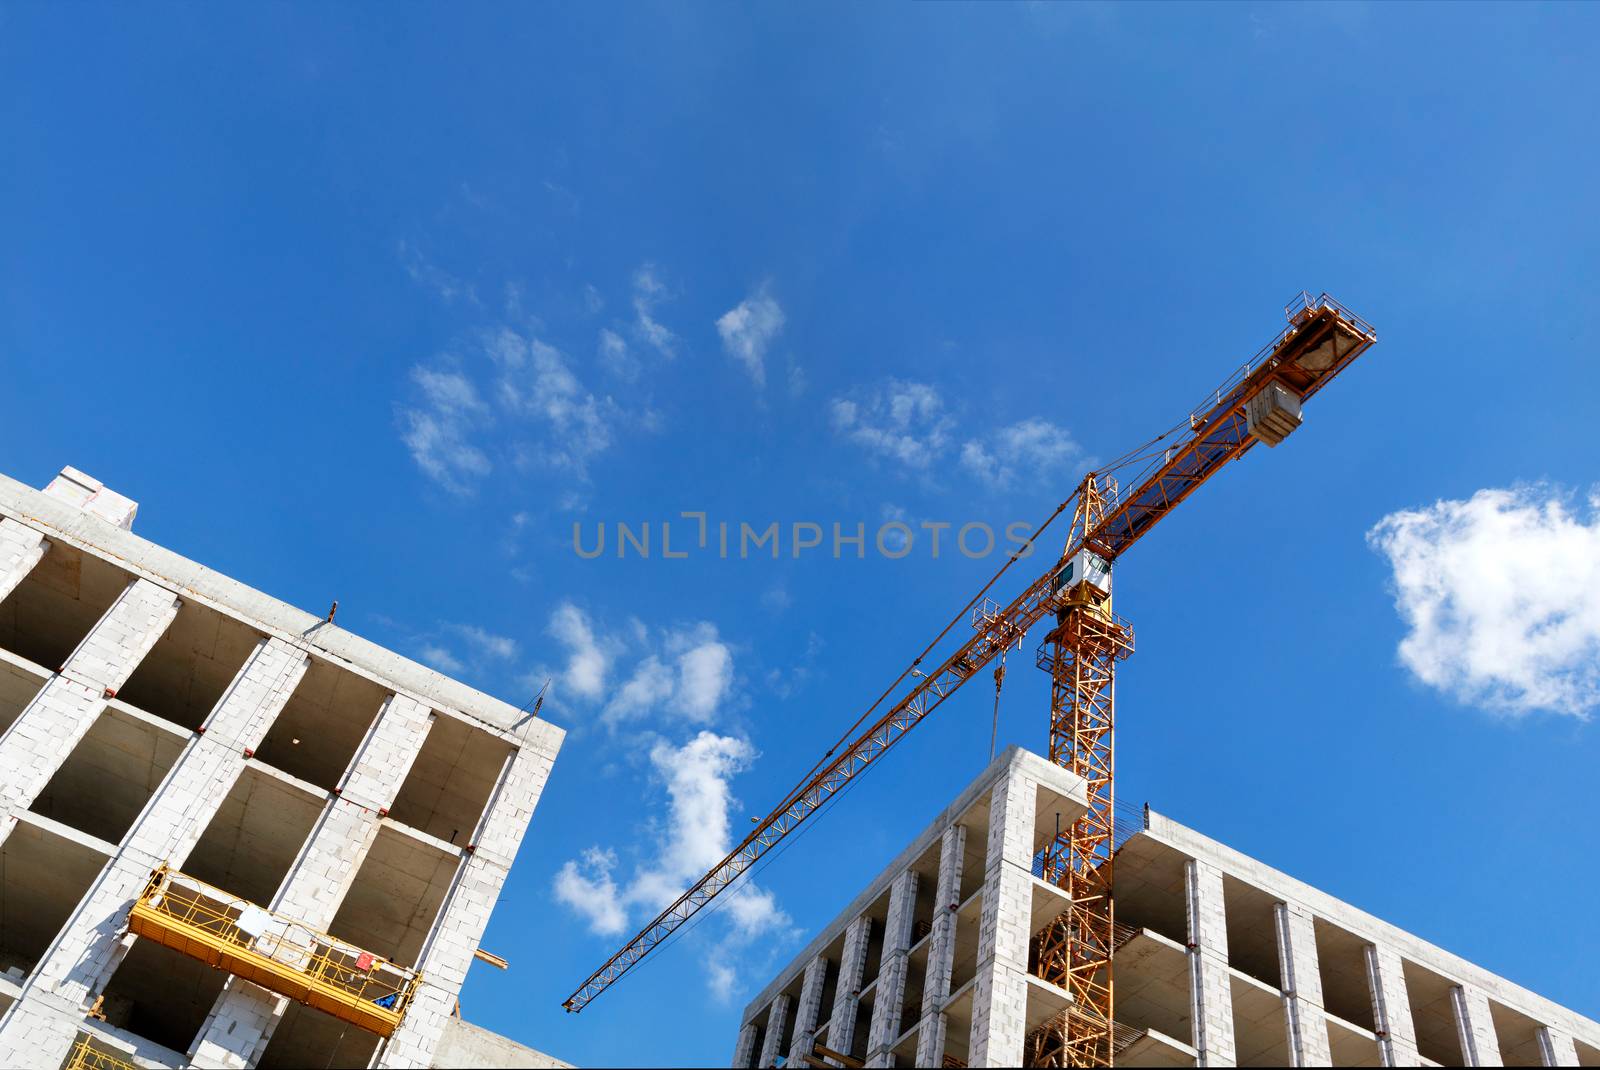 Monolithic frame concrete construction and tower cranes at the construction site of a multi-storey residential building against the blue skyand white clouds, copy space.